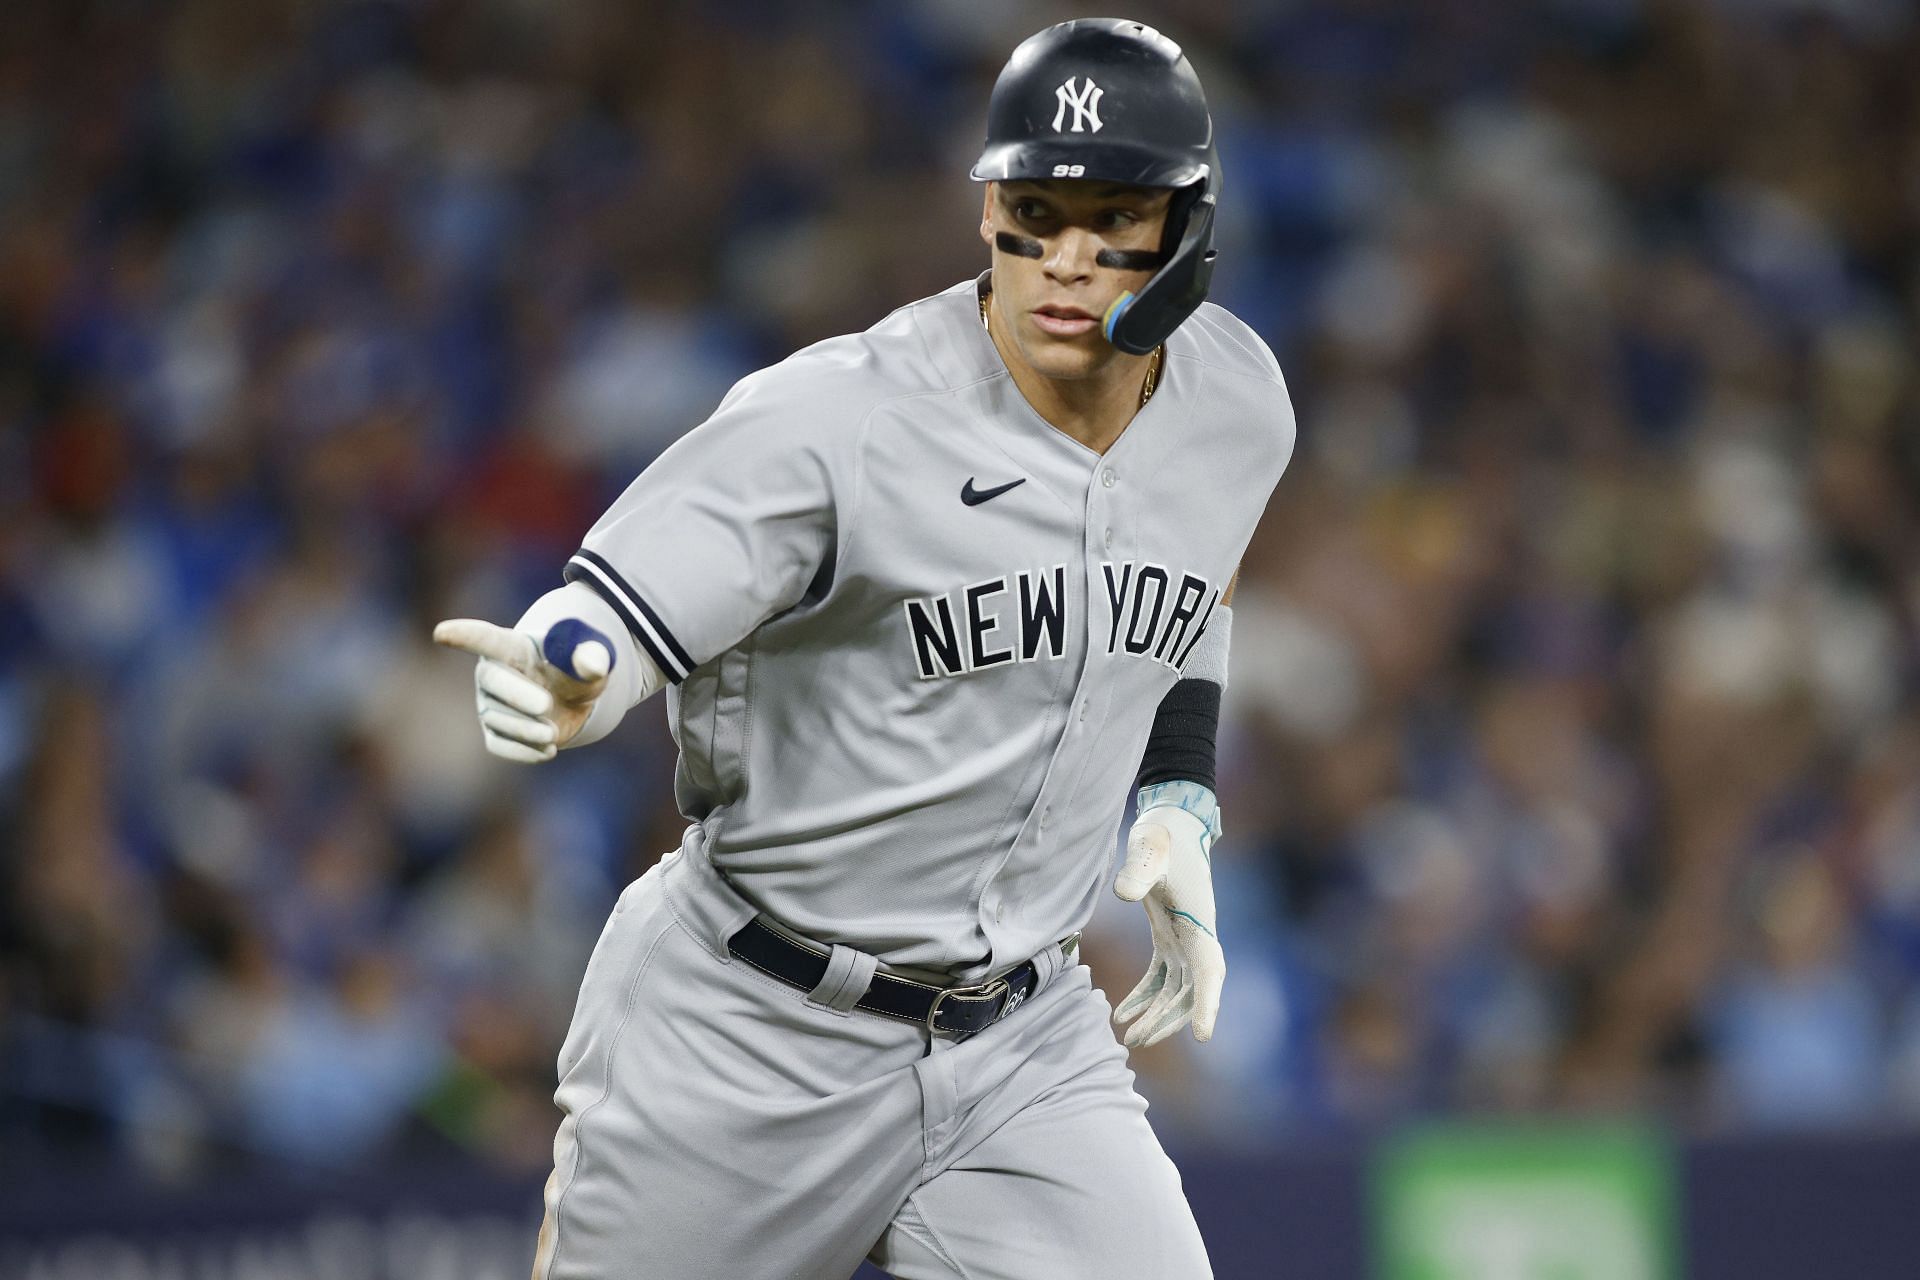 The Yankees have a projected total payroll of $273 million, including arbitration figures and pre-arbitration figures for players not yet eligible